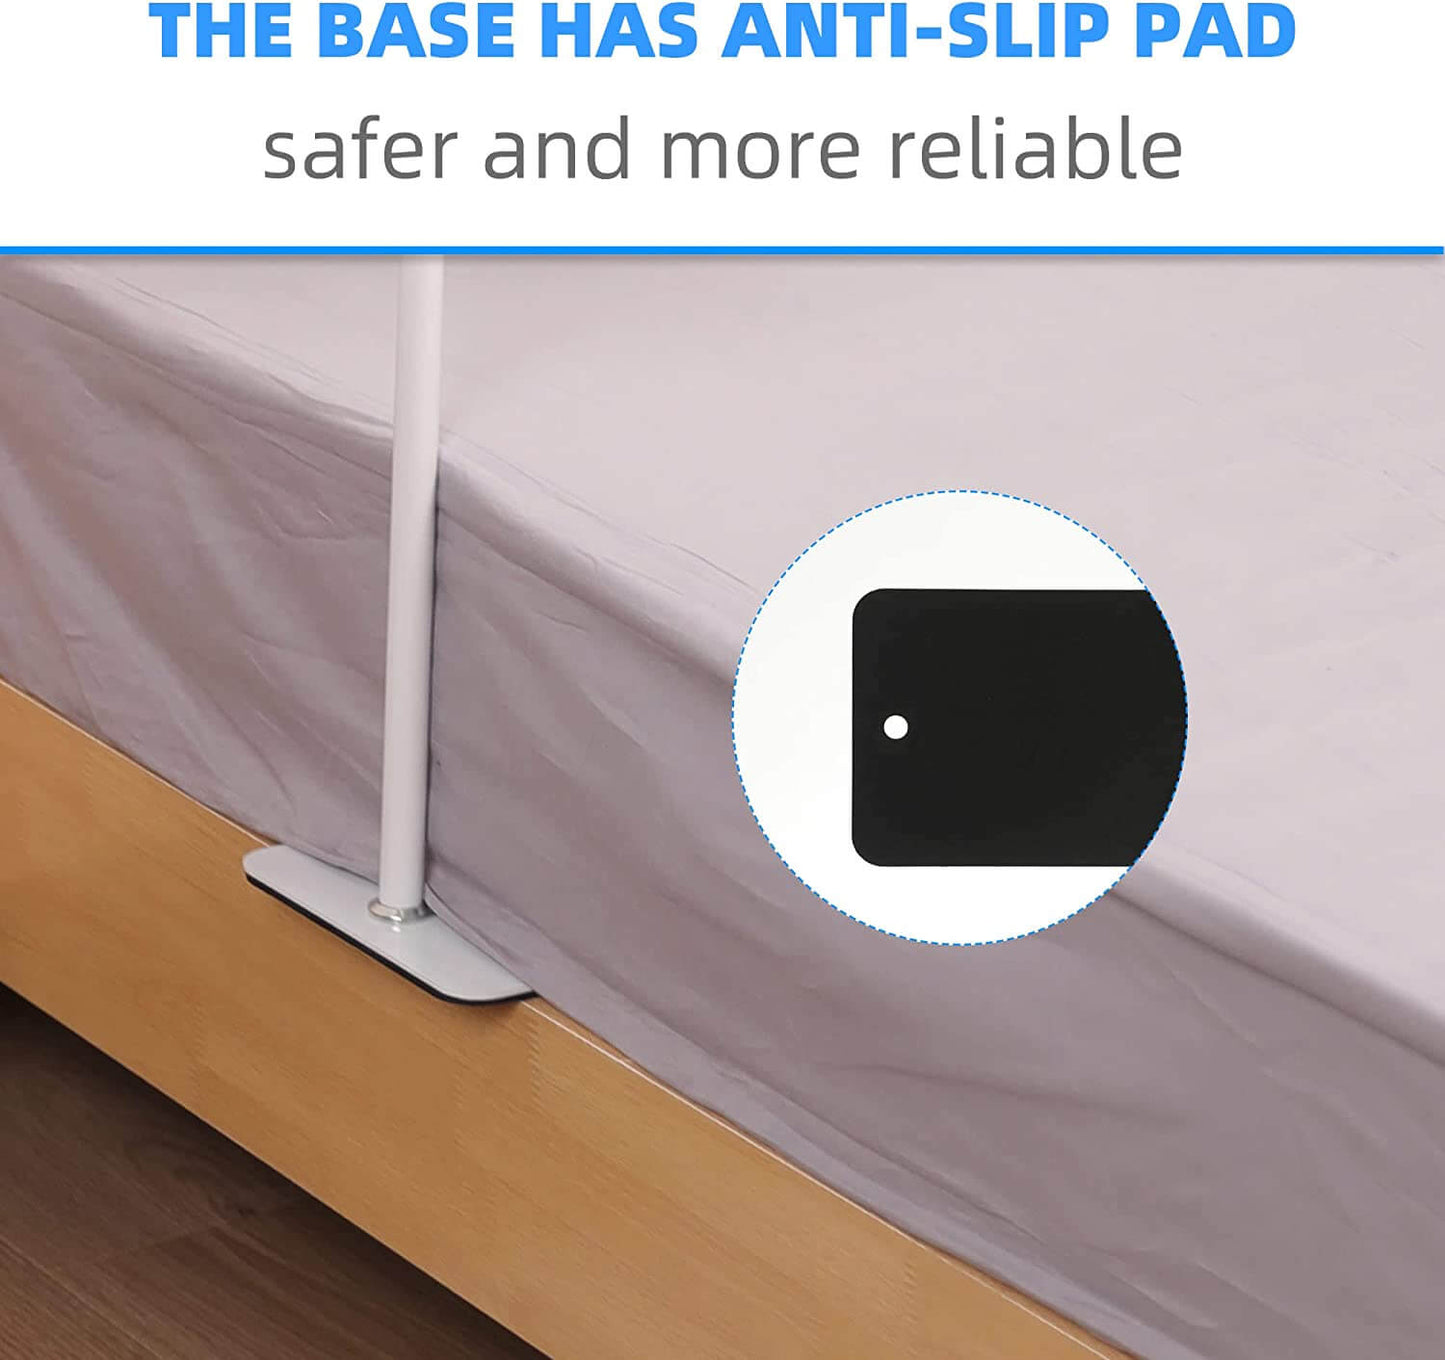 CPAP hose holder/stand with 360° rotating clip & adjustable arm for bed, under the mattress